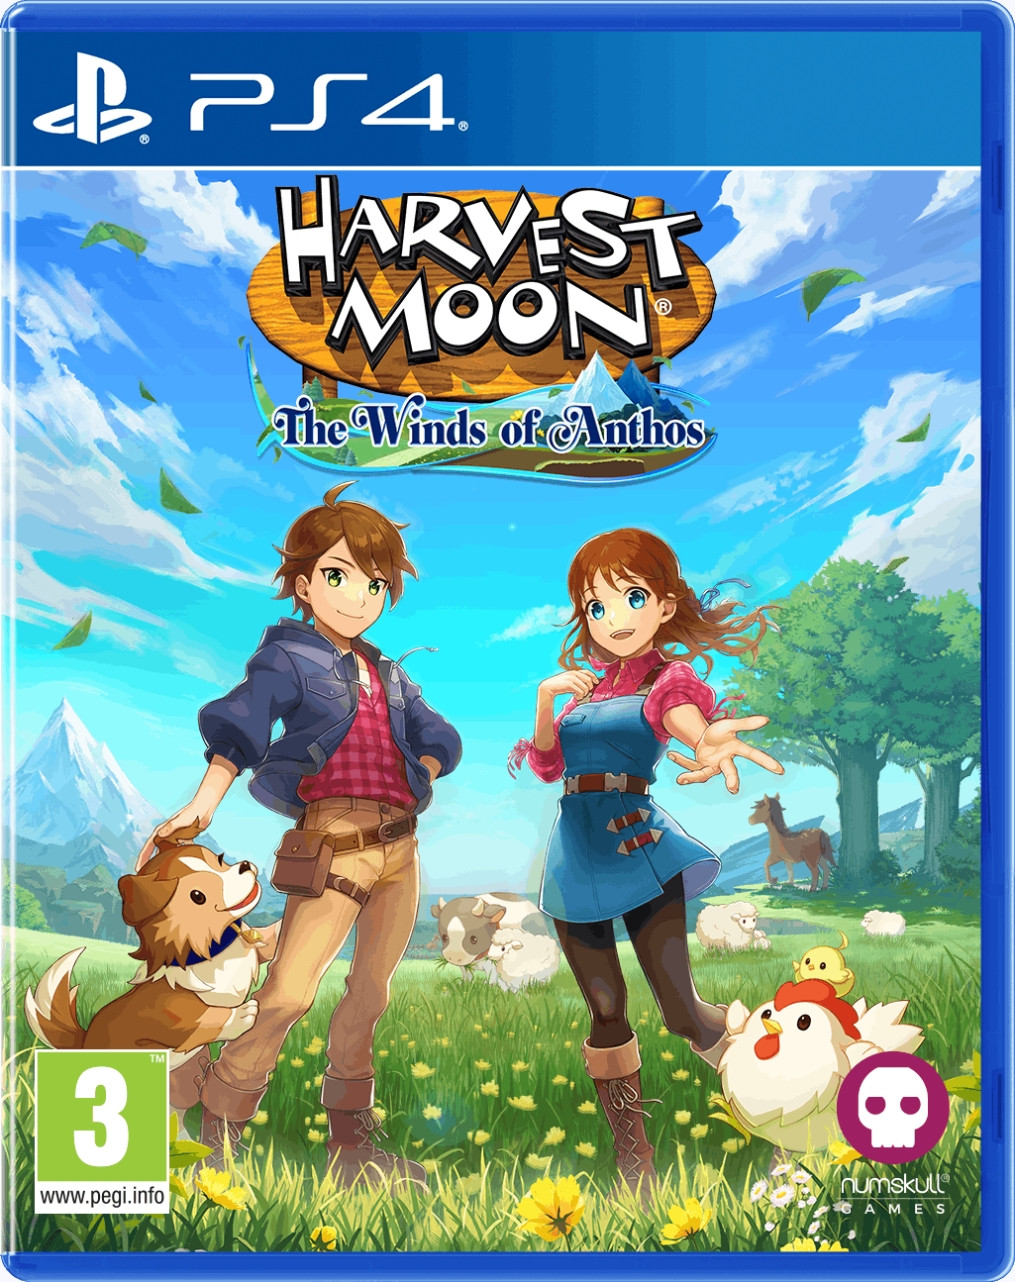 Harvest Moon: The Winds of Anthos (PS4), Numskull Games